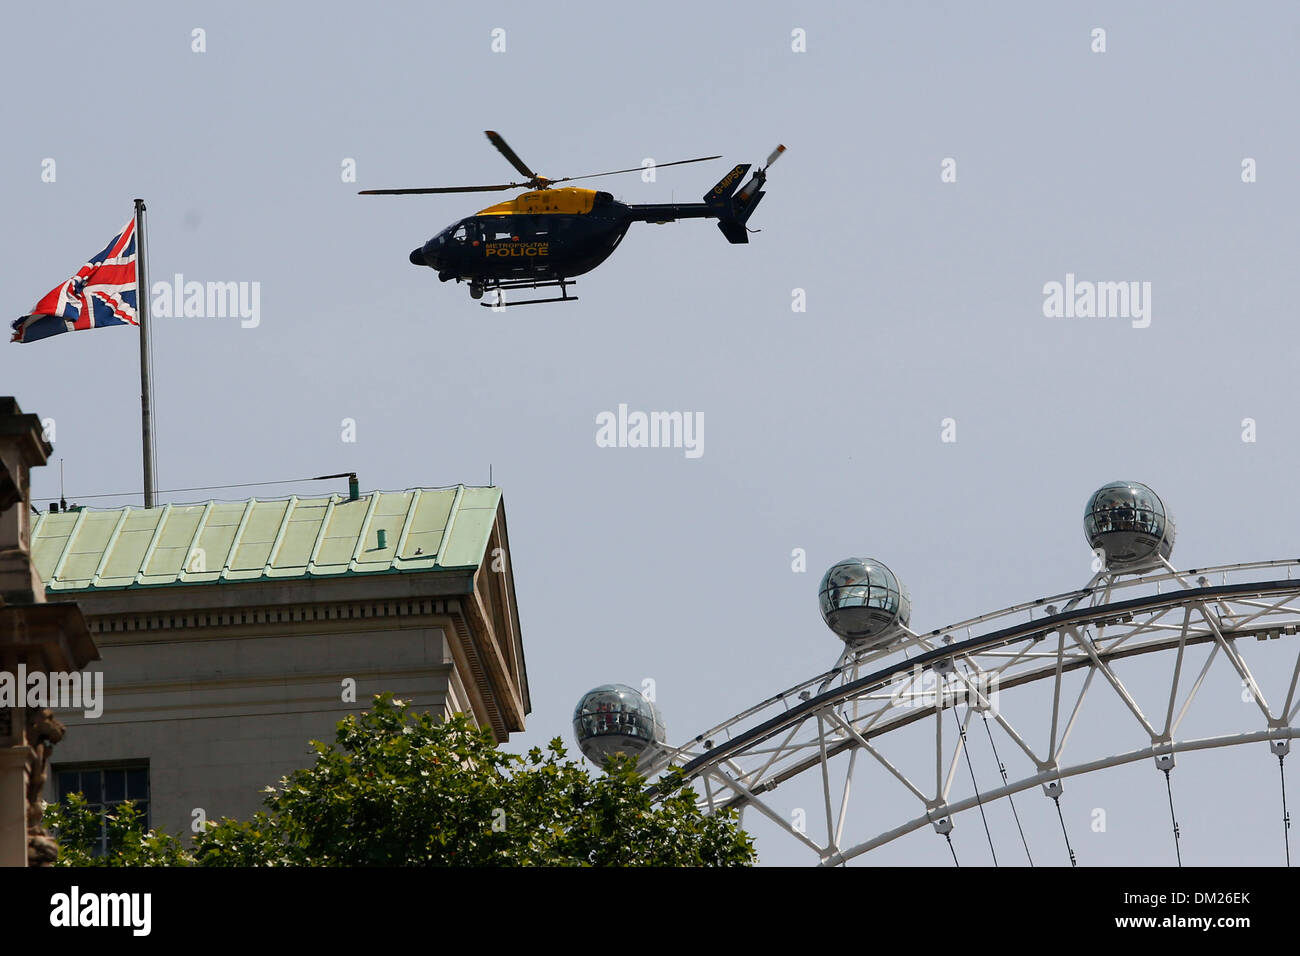 A police helicopter above the London Eye and Number 10 Downing Street in London, Britain, 17 July 2013. Stock Photo